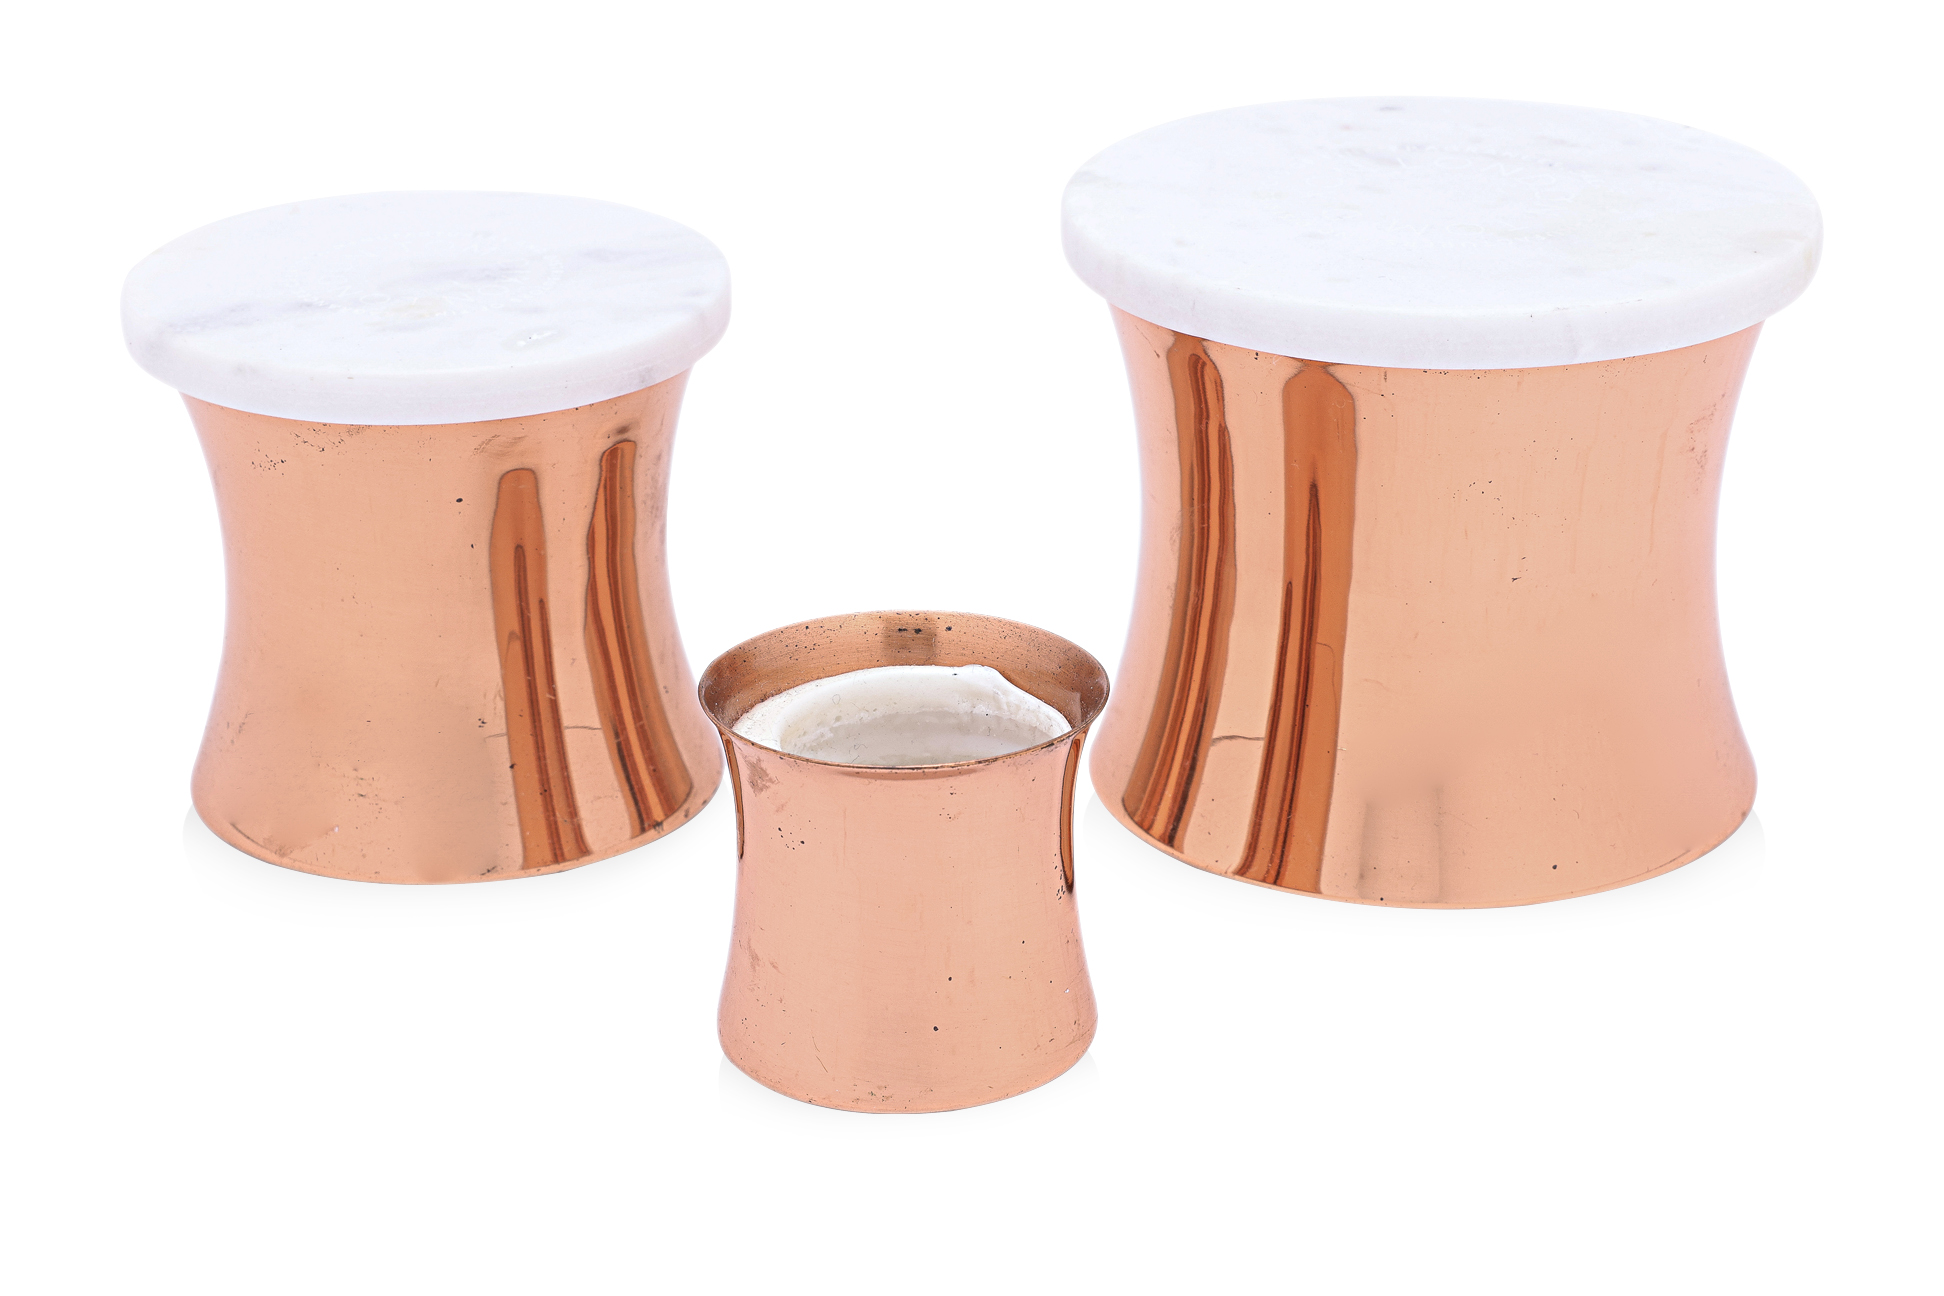 SIX TOM DIXON 'ECLECTIC' AND OTHER COPPER CANDLES - Image 3 of 3